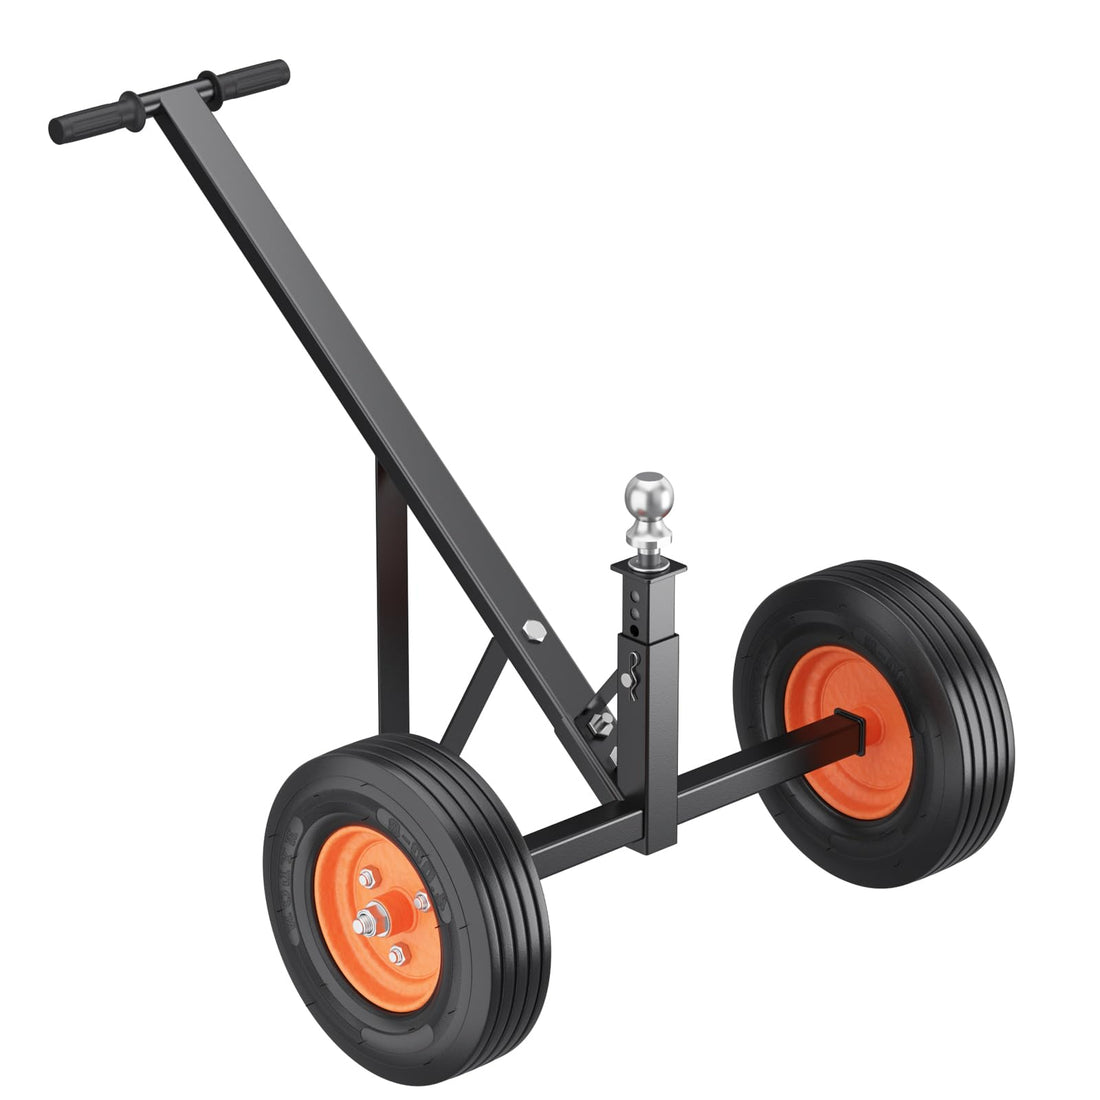 600 lbs Trailer Dolly, 16-24 Inch Height Adjust, Mover Tool